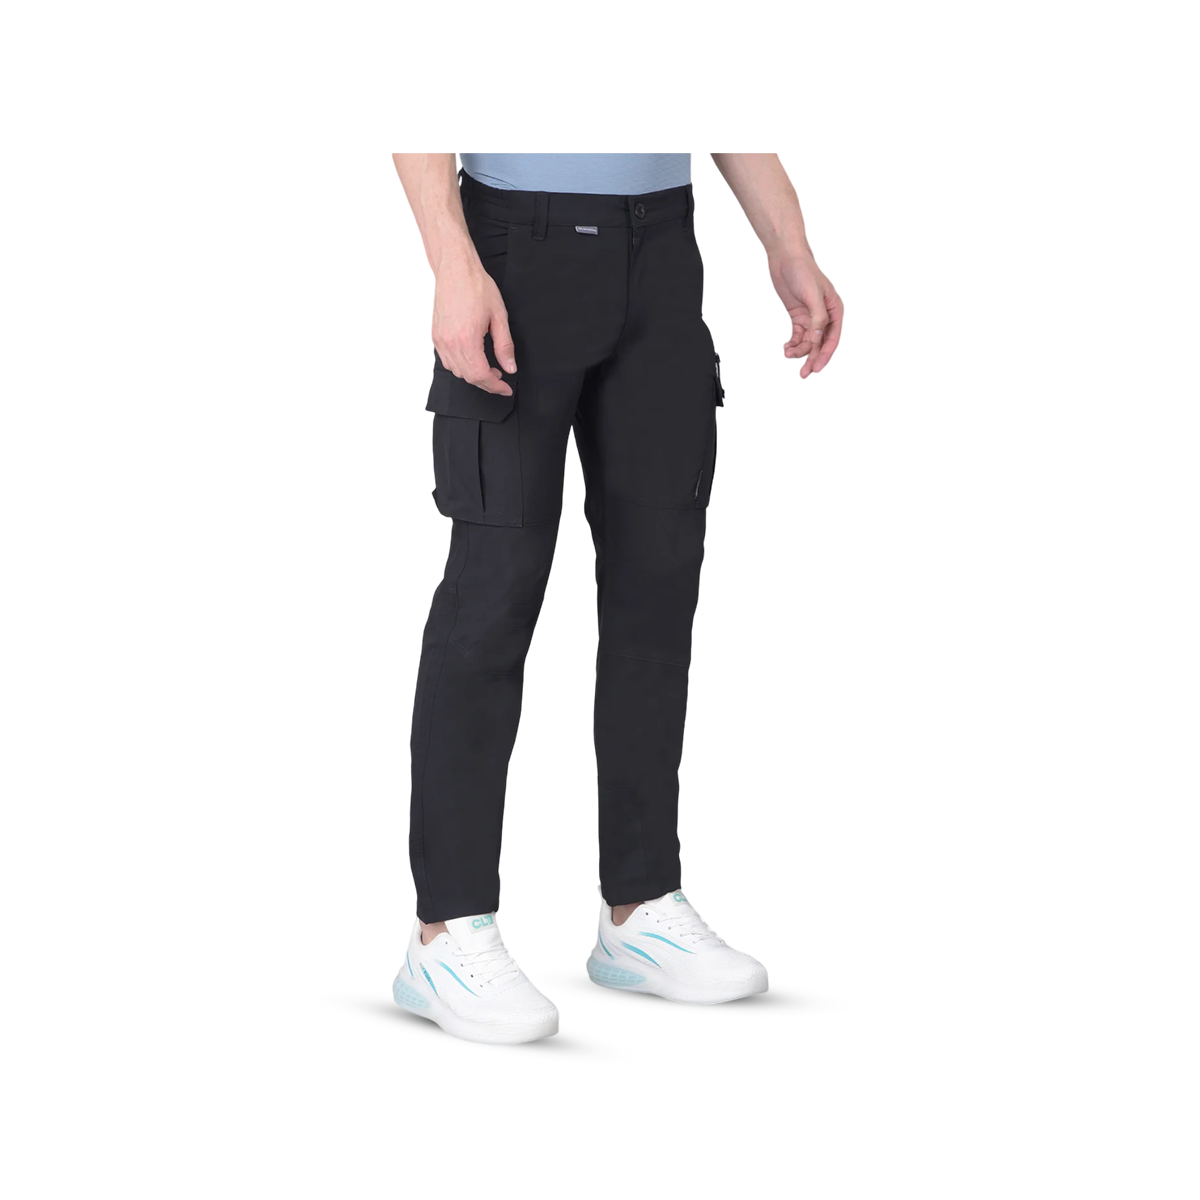 QUADRA Black Trouser for Sleek Style and All-Day Comfort - Large